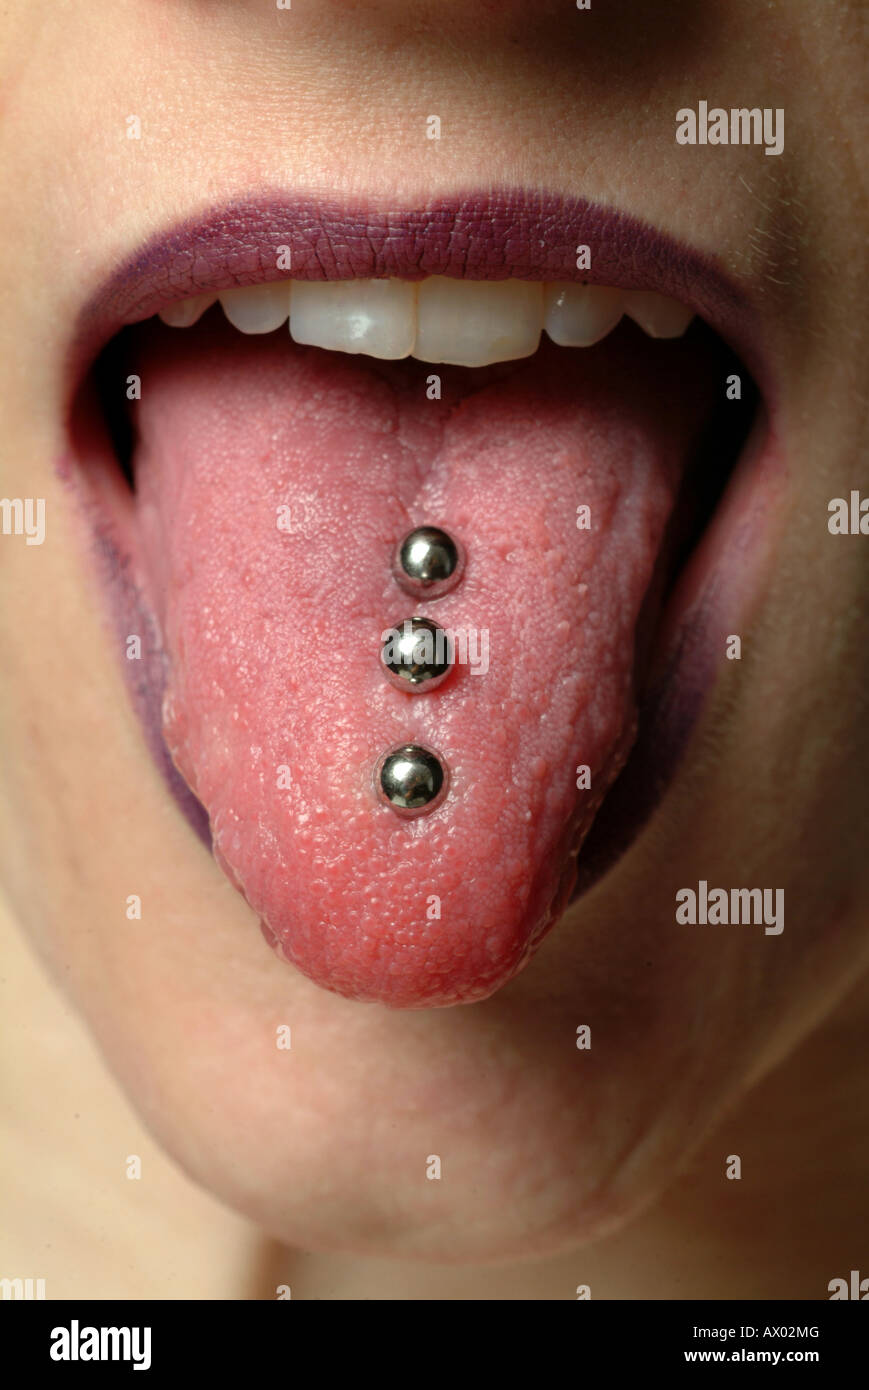 Guys With Tongue Piercings Deals Discount Save 47 Jlcatjgobmx 